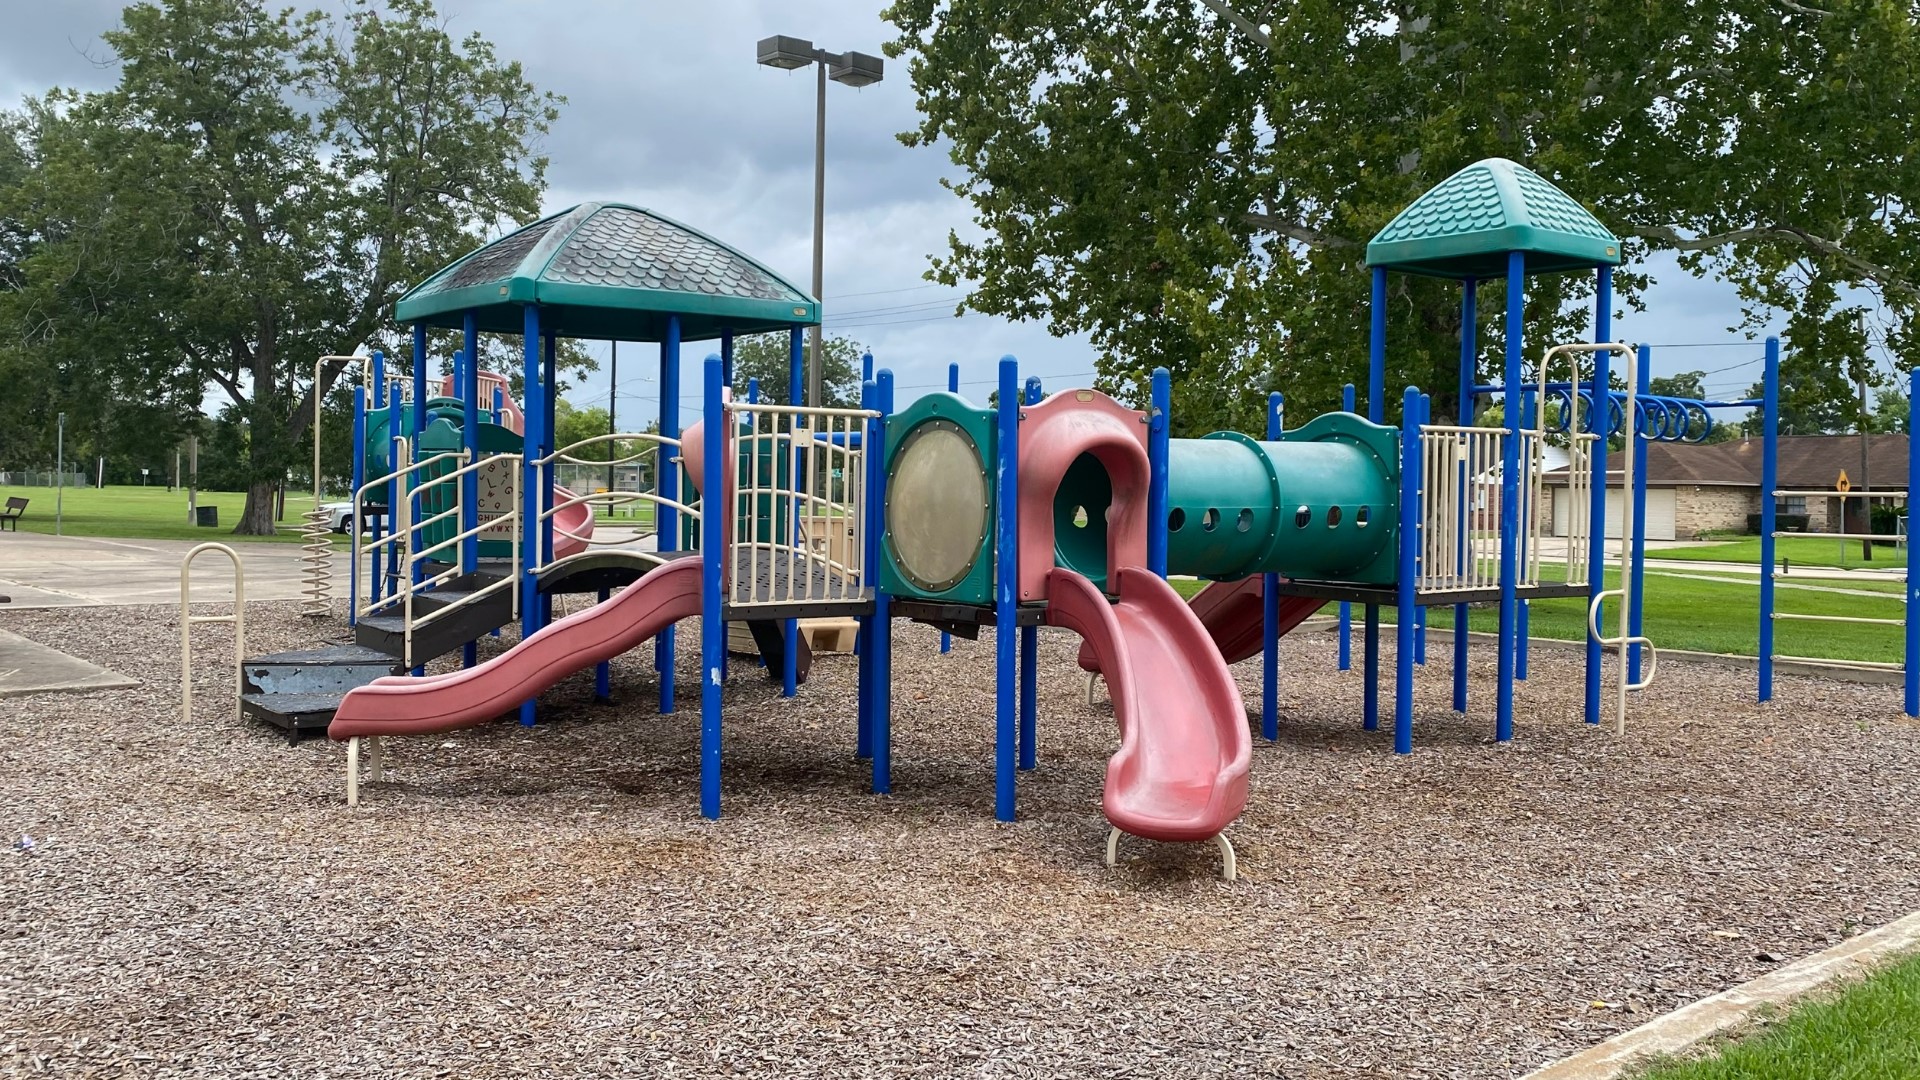 Beaumont residents in the city’s South End are calling for action, in hopes that their children will have a safe place to play.